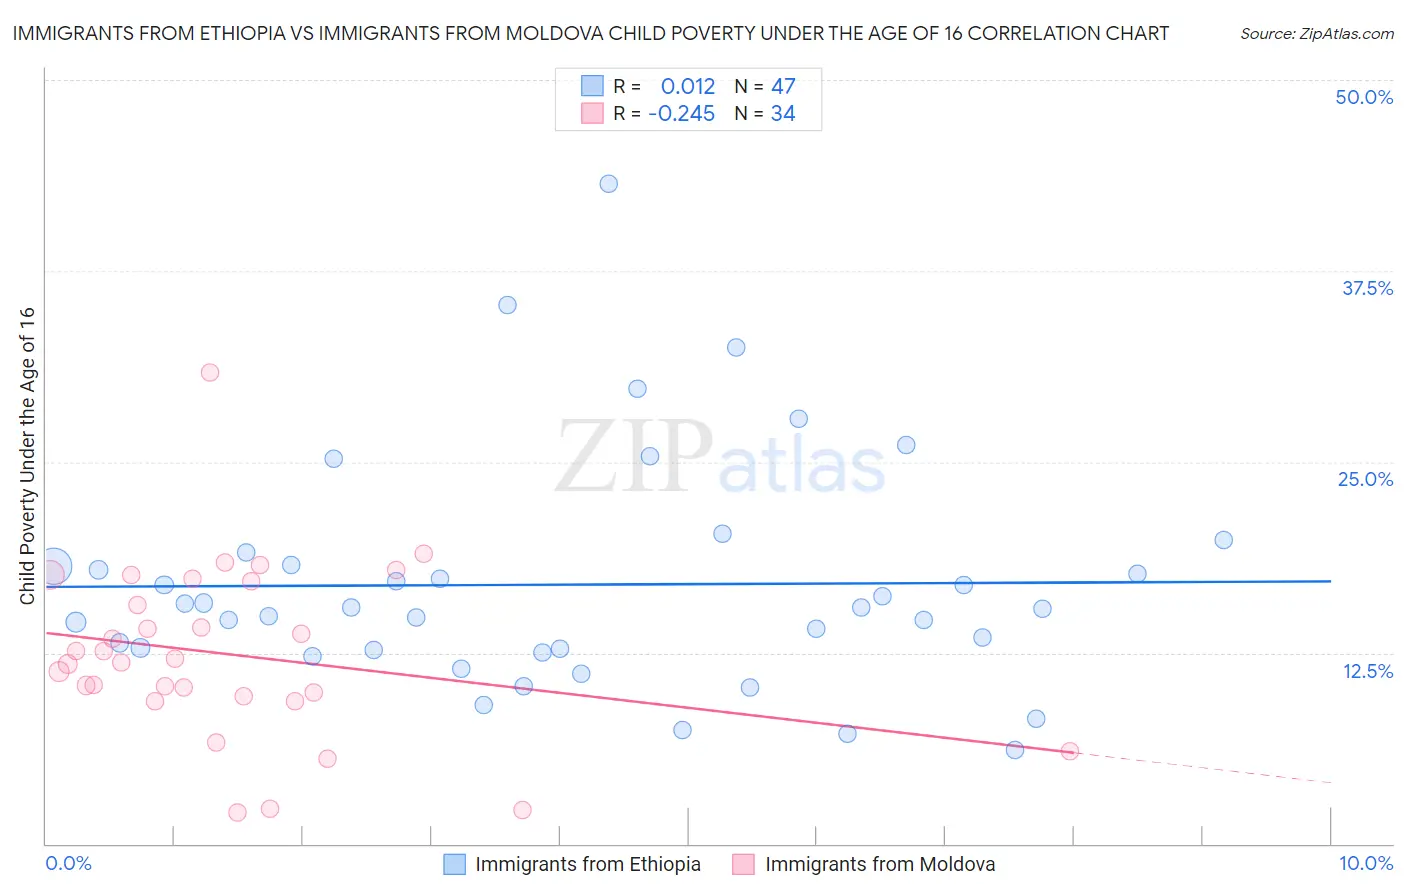 Immigrants from Ethiopia vs Immigrants from Moldova Child Poverty Under the Age of 16